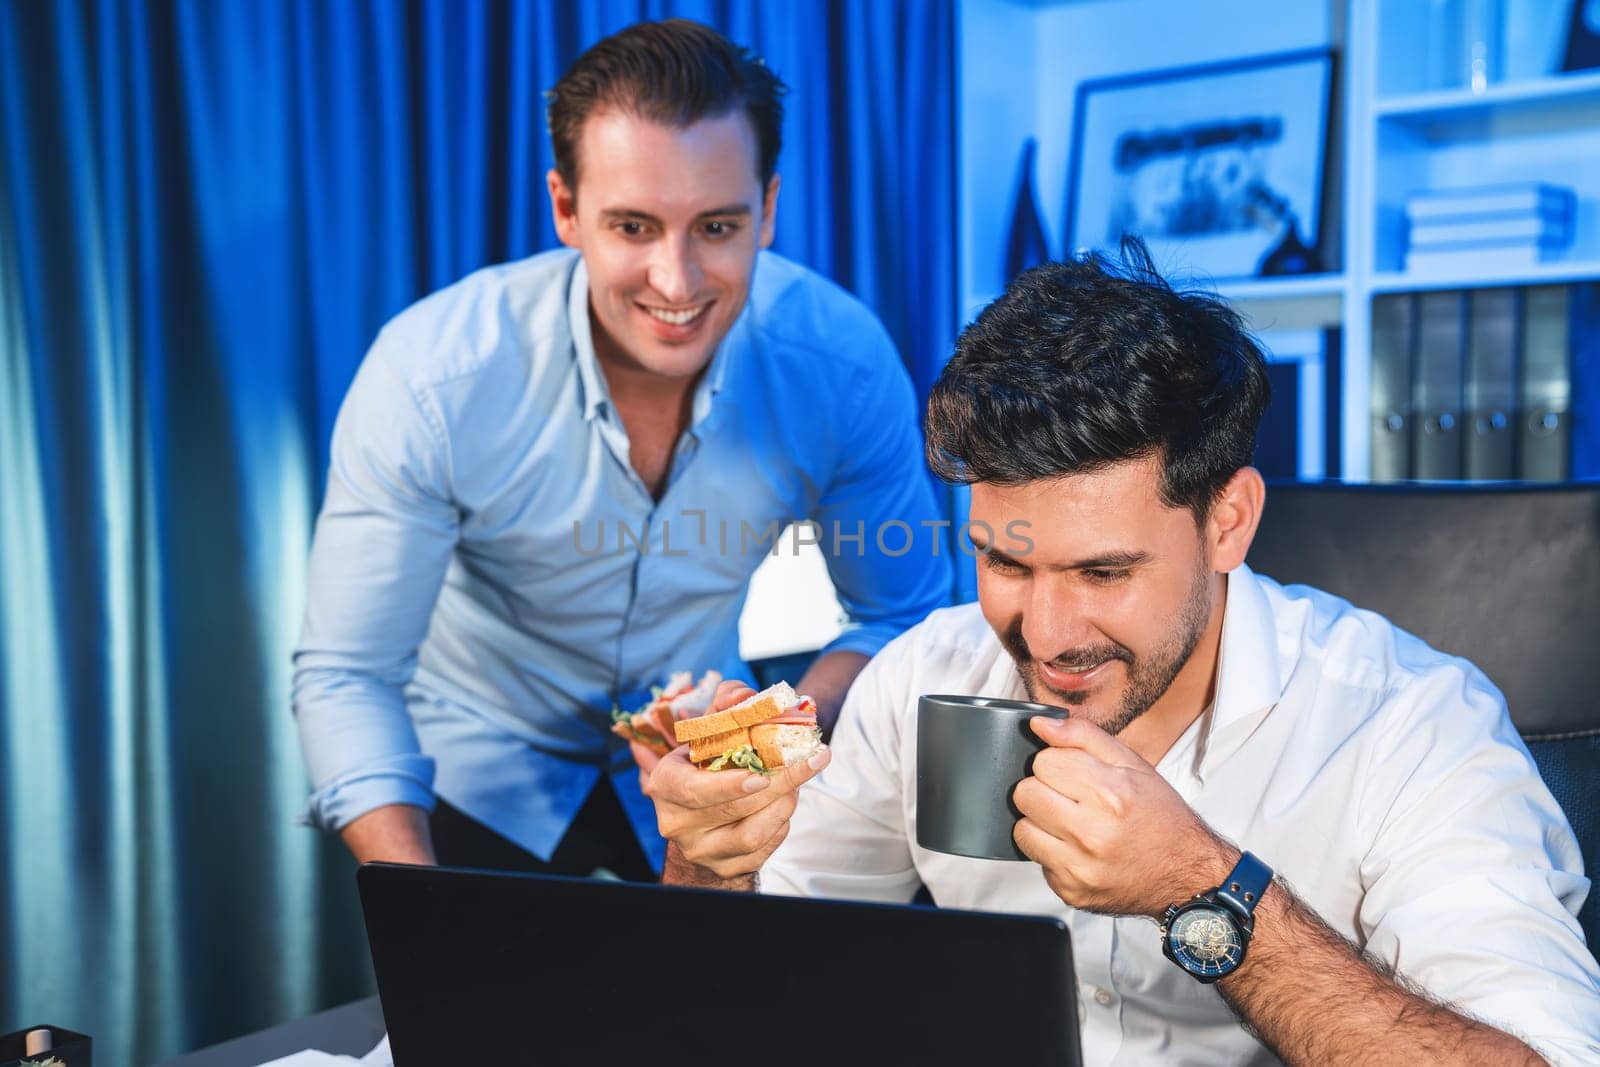 Business partners with happy smiling face sharing delicious sandwich dish with friend at night time. Hungry creative colleagues enjoy eating fast food at workplace with neon blue light. Sellable.